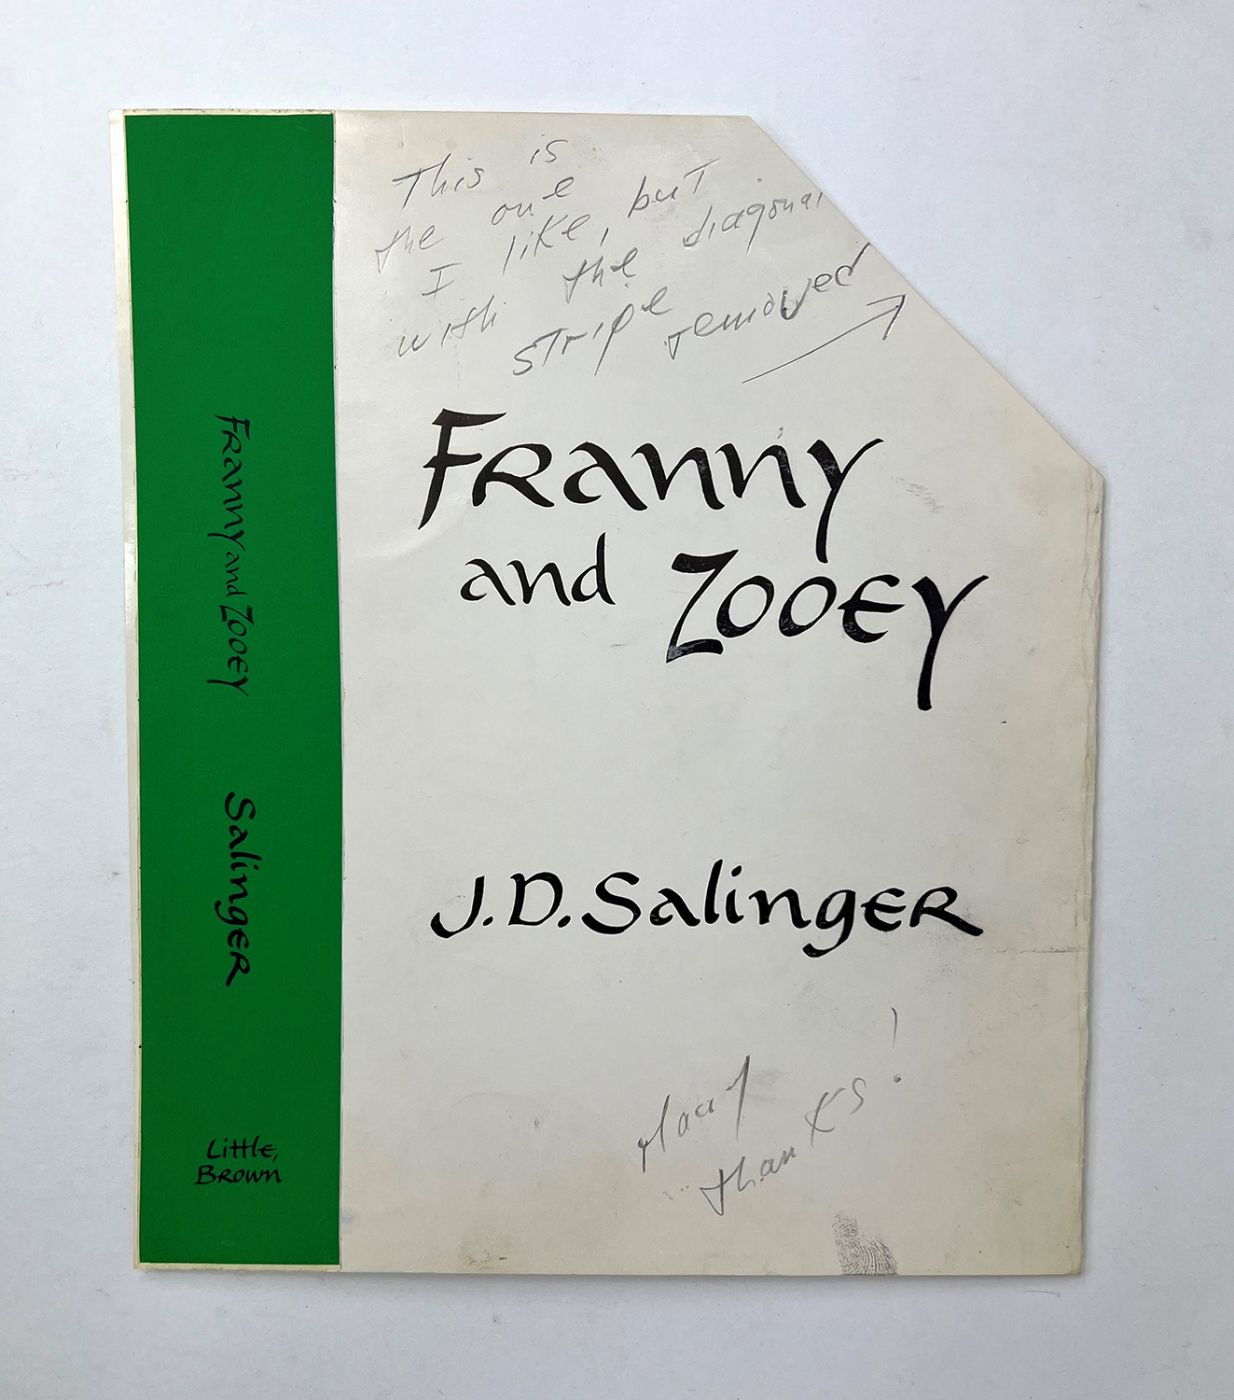 FRANNY AND ZOOEY - Original Dustwrapper Artwork - INSCRIBED BY THE AUTHOR. -  image 2